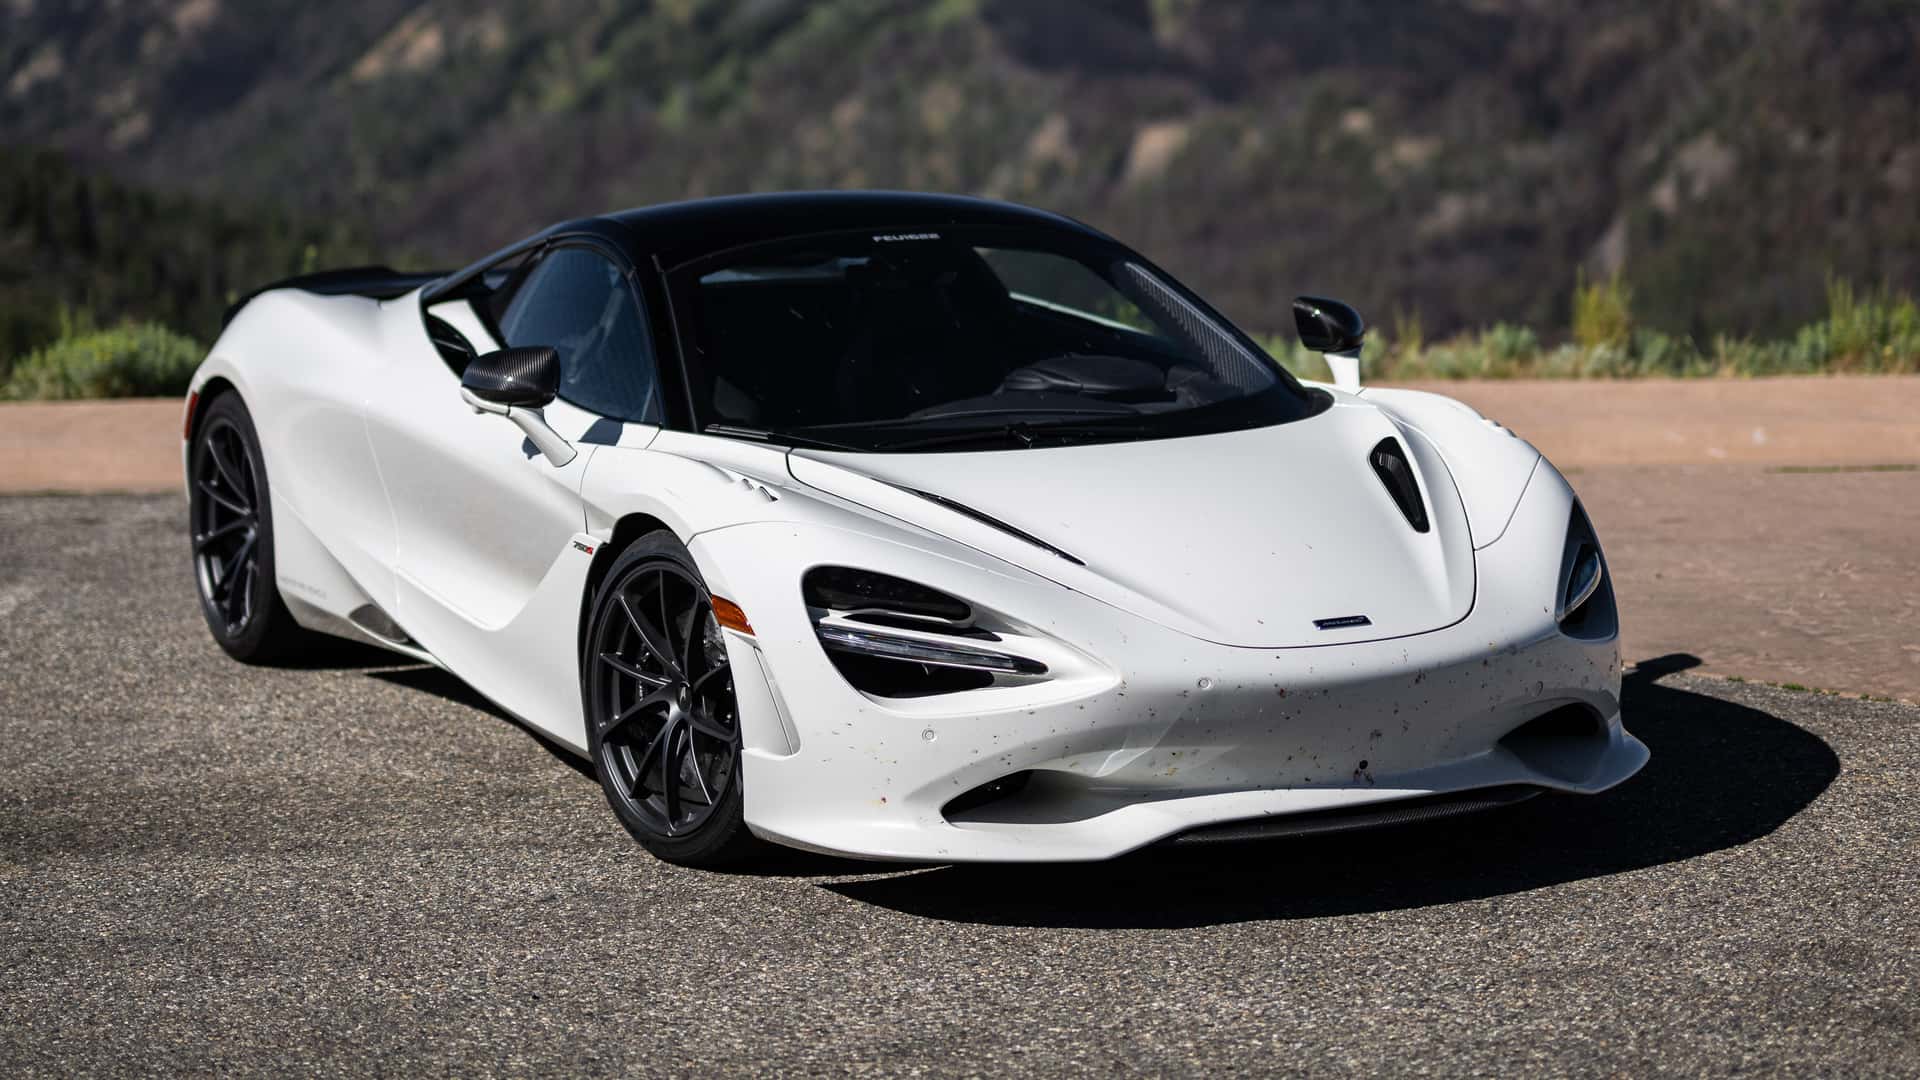 New McLaren 750S Supercar Joins the 200 mph Club During North American Debut